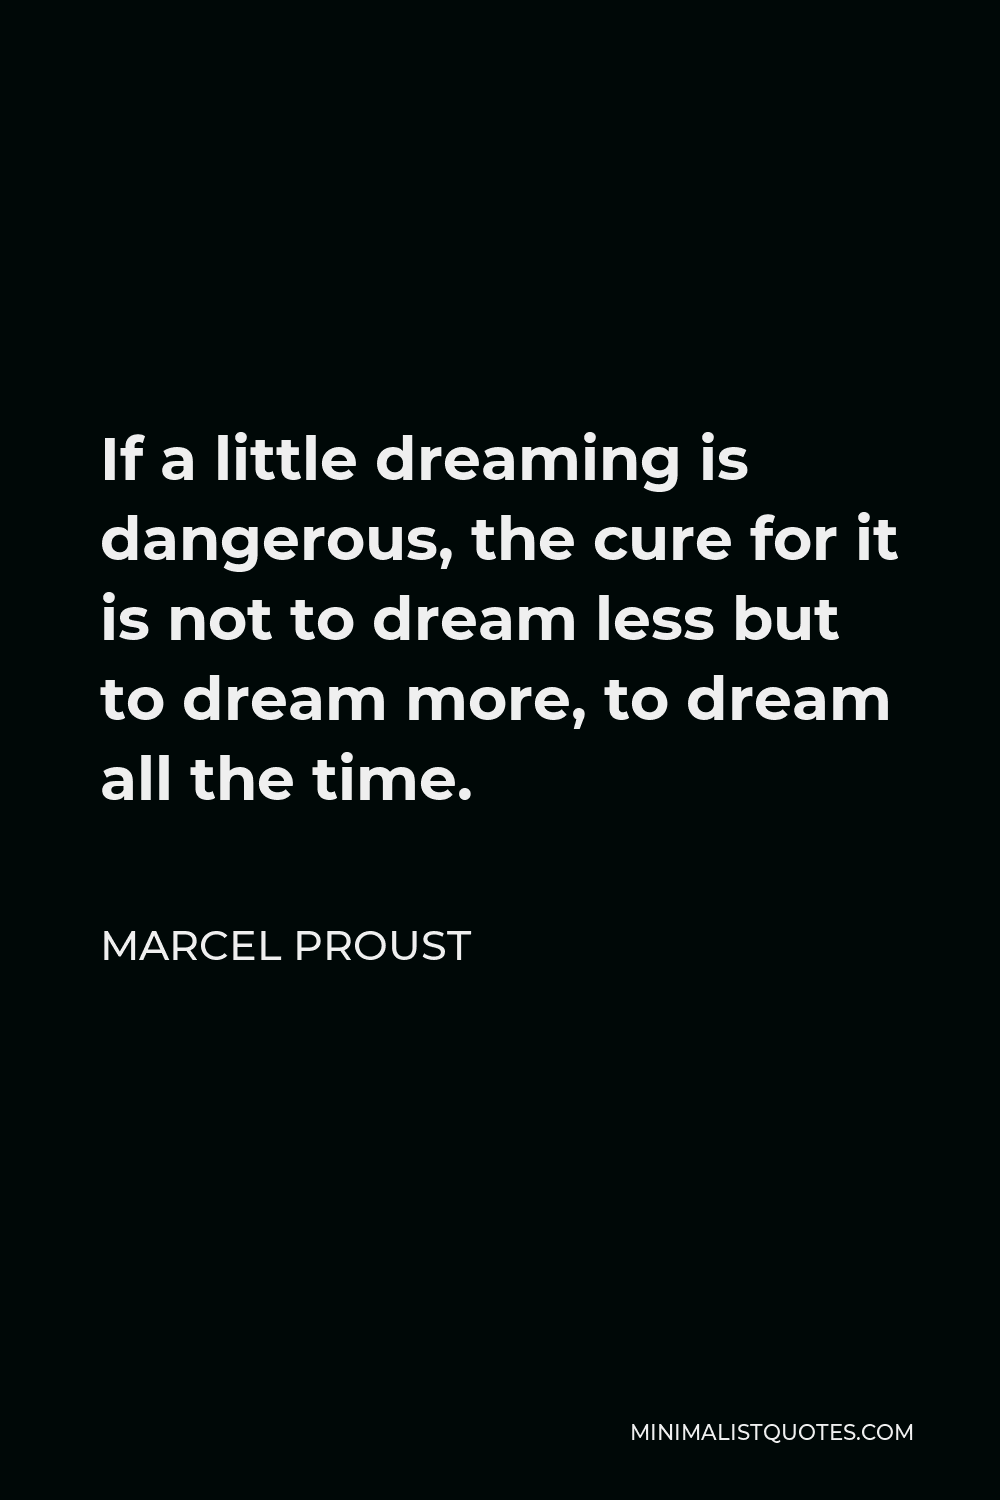 Marcel Proust Quote - If a little dreaming is dangerous, the cure for it is not to dream less but to dream more, to dream all the time.